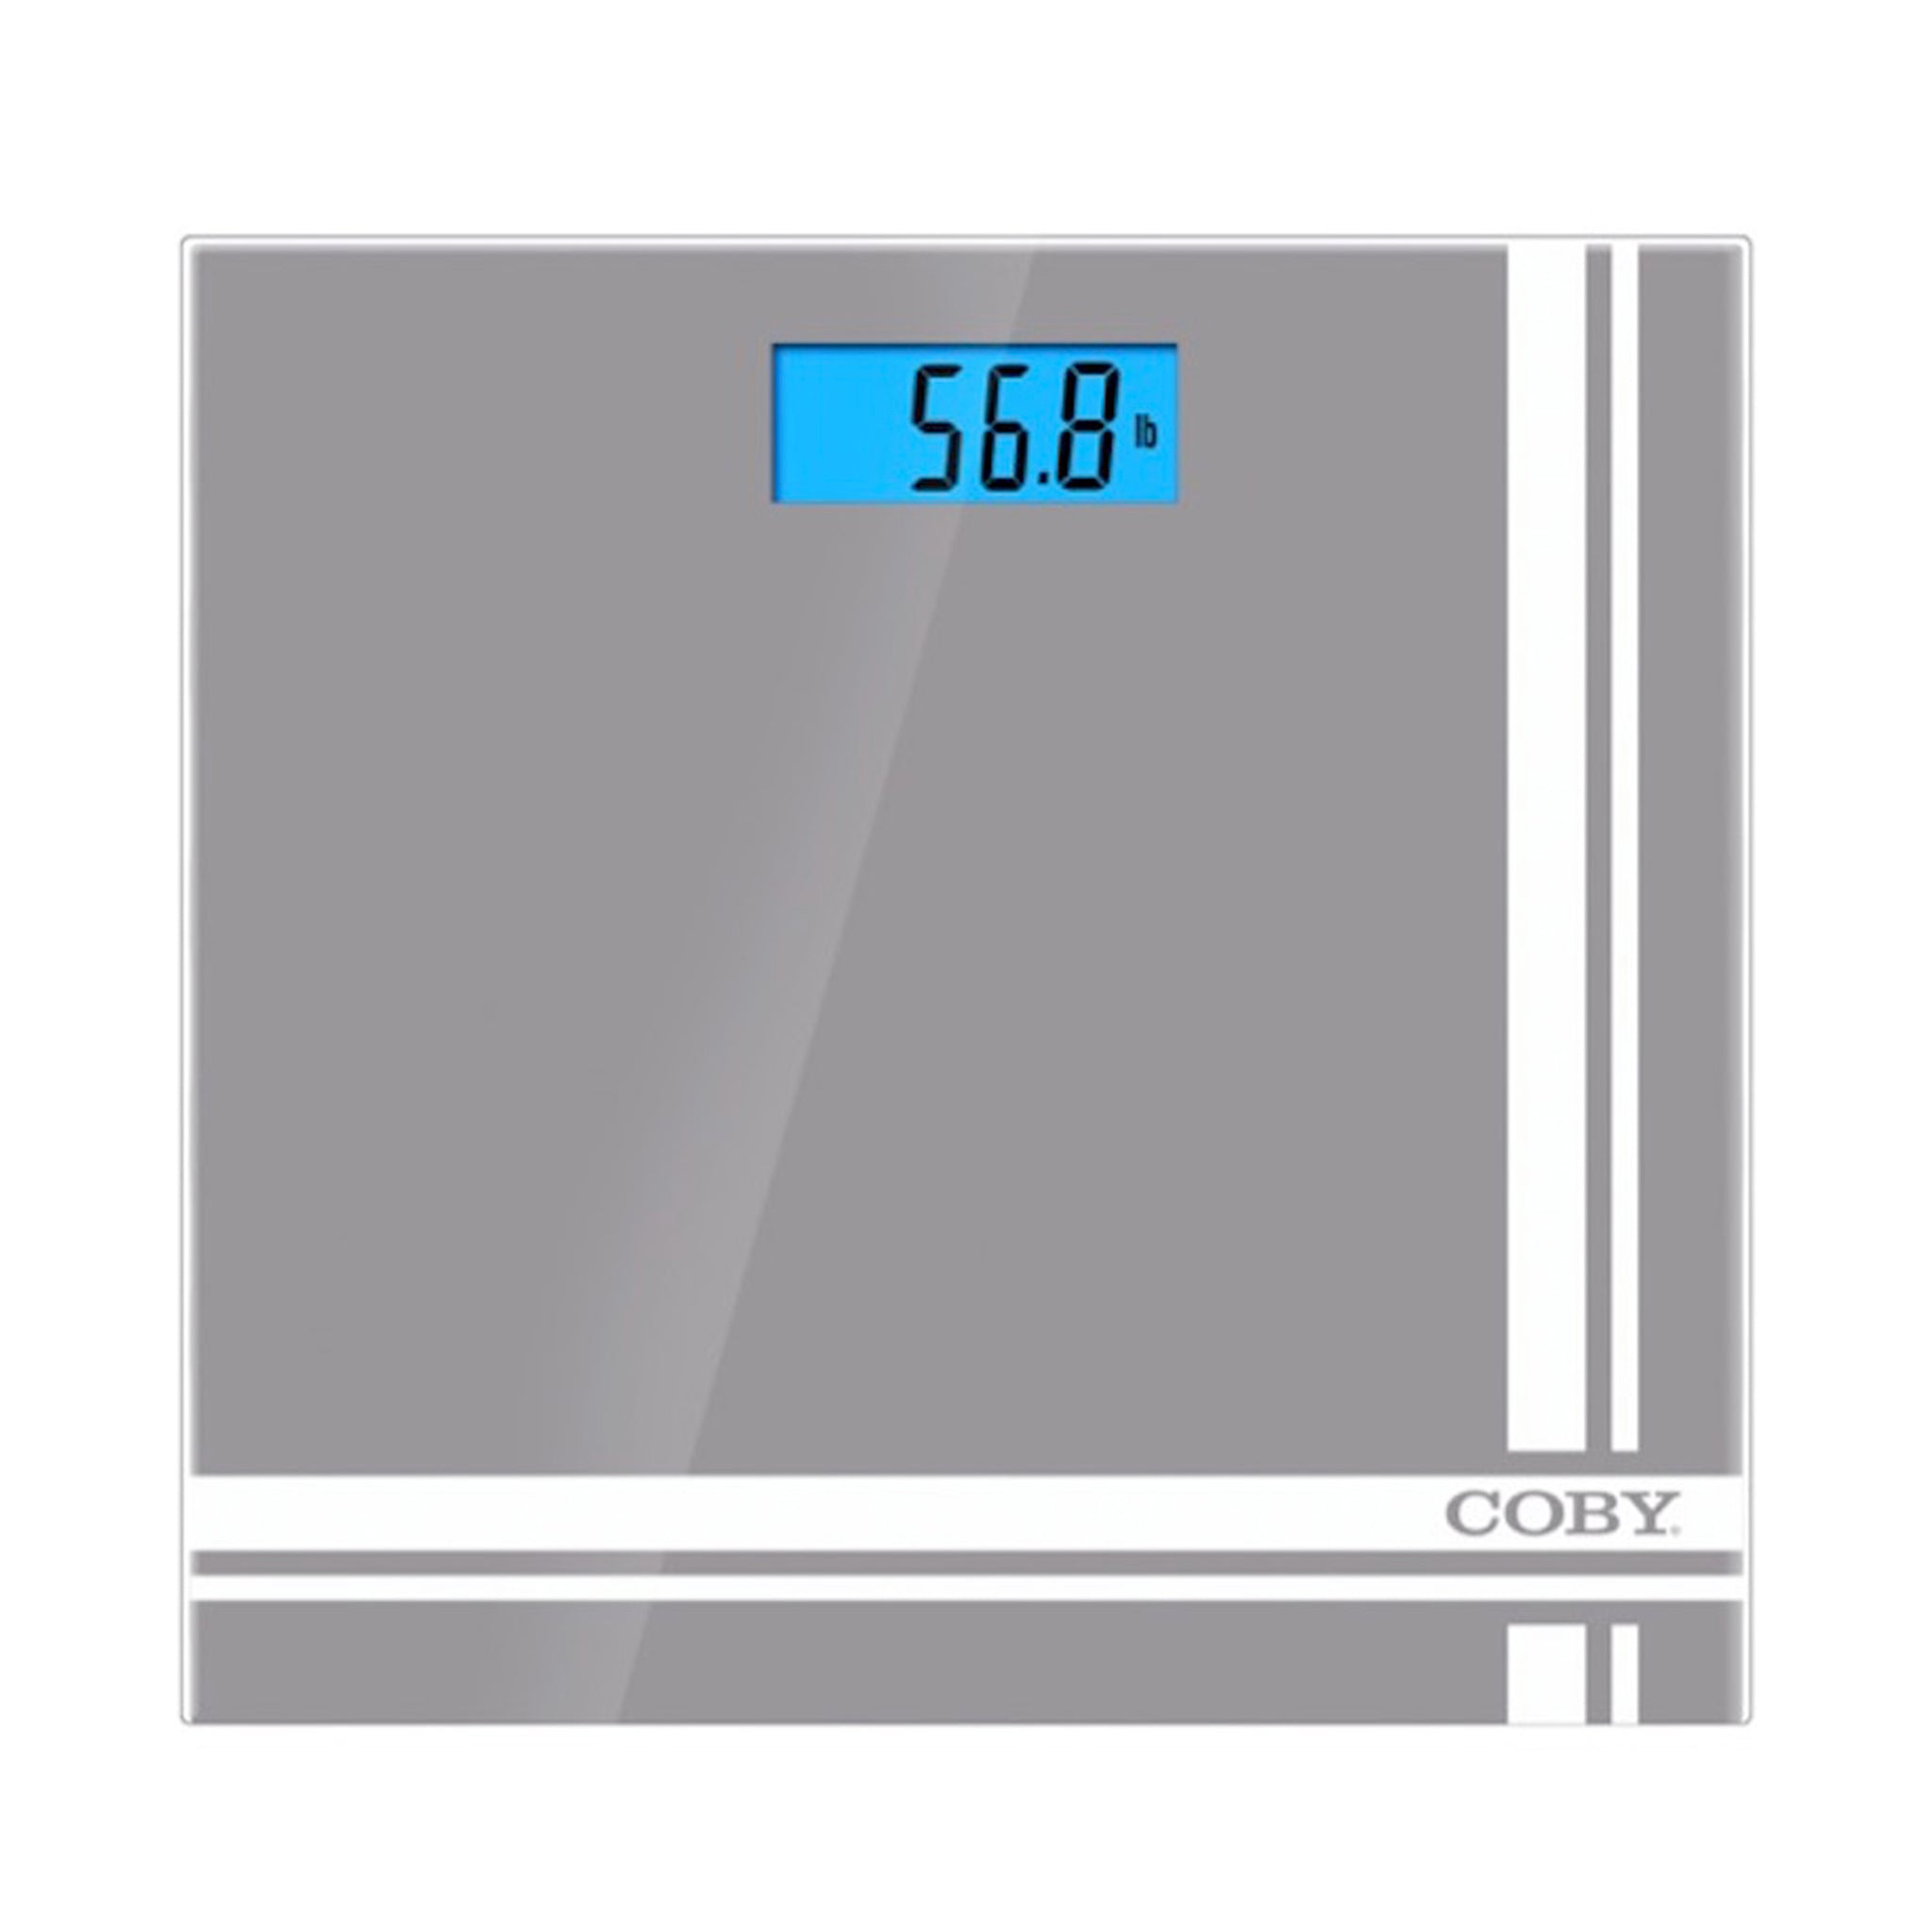 COBY Glass Digital Scale with Blue LCD Display